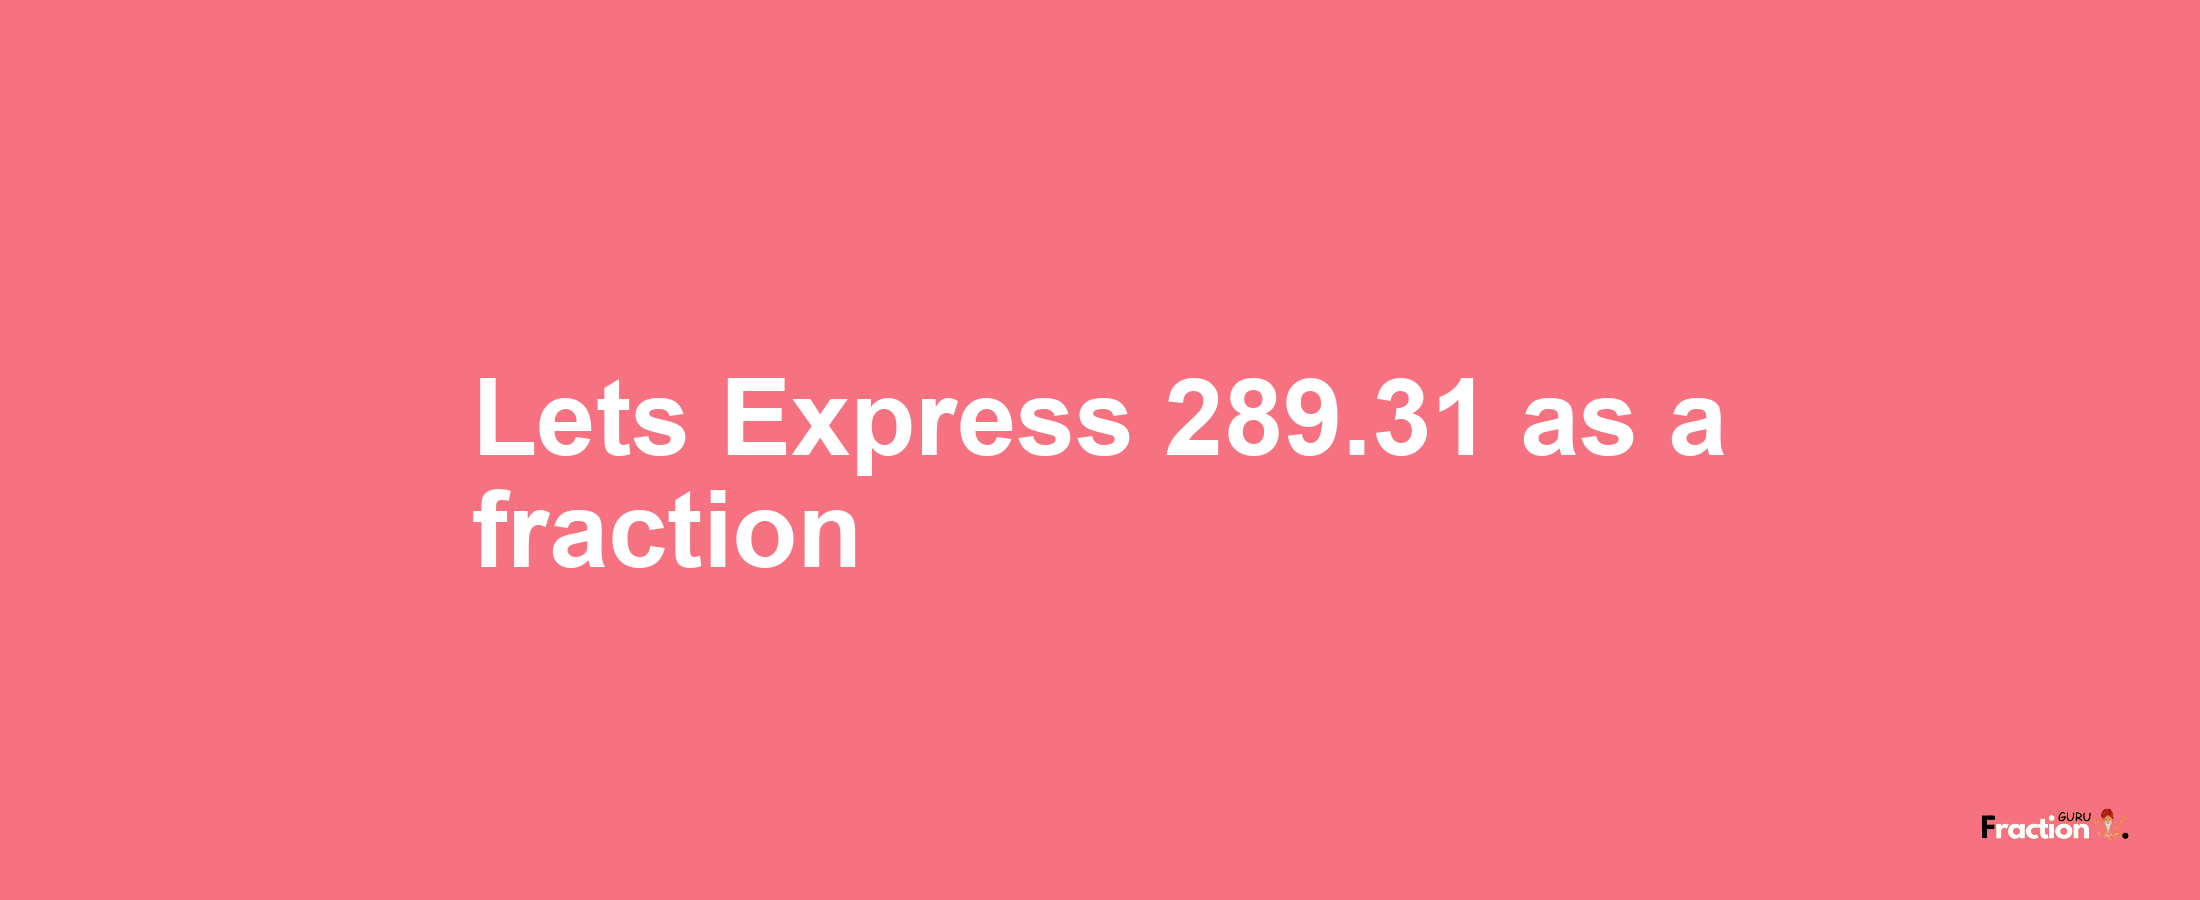 Lets Express 289.31 as afraction